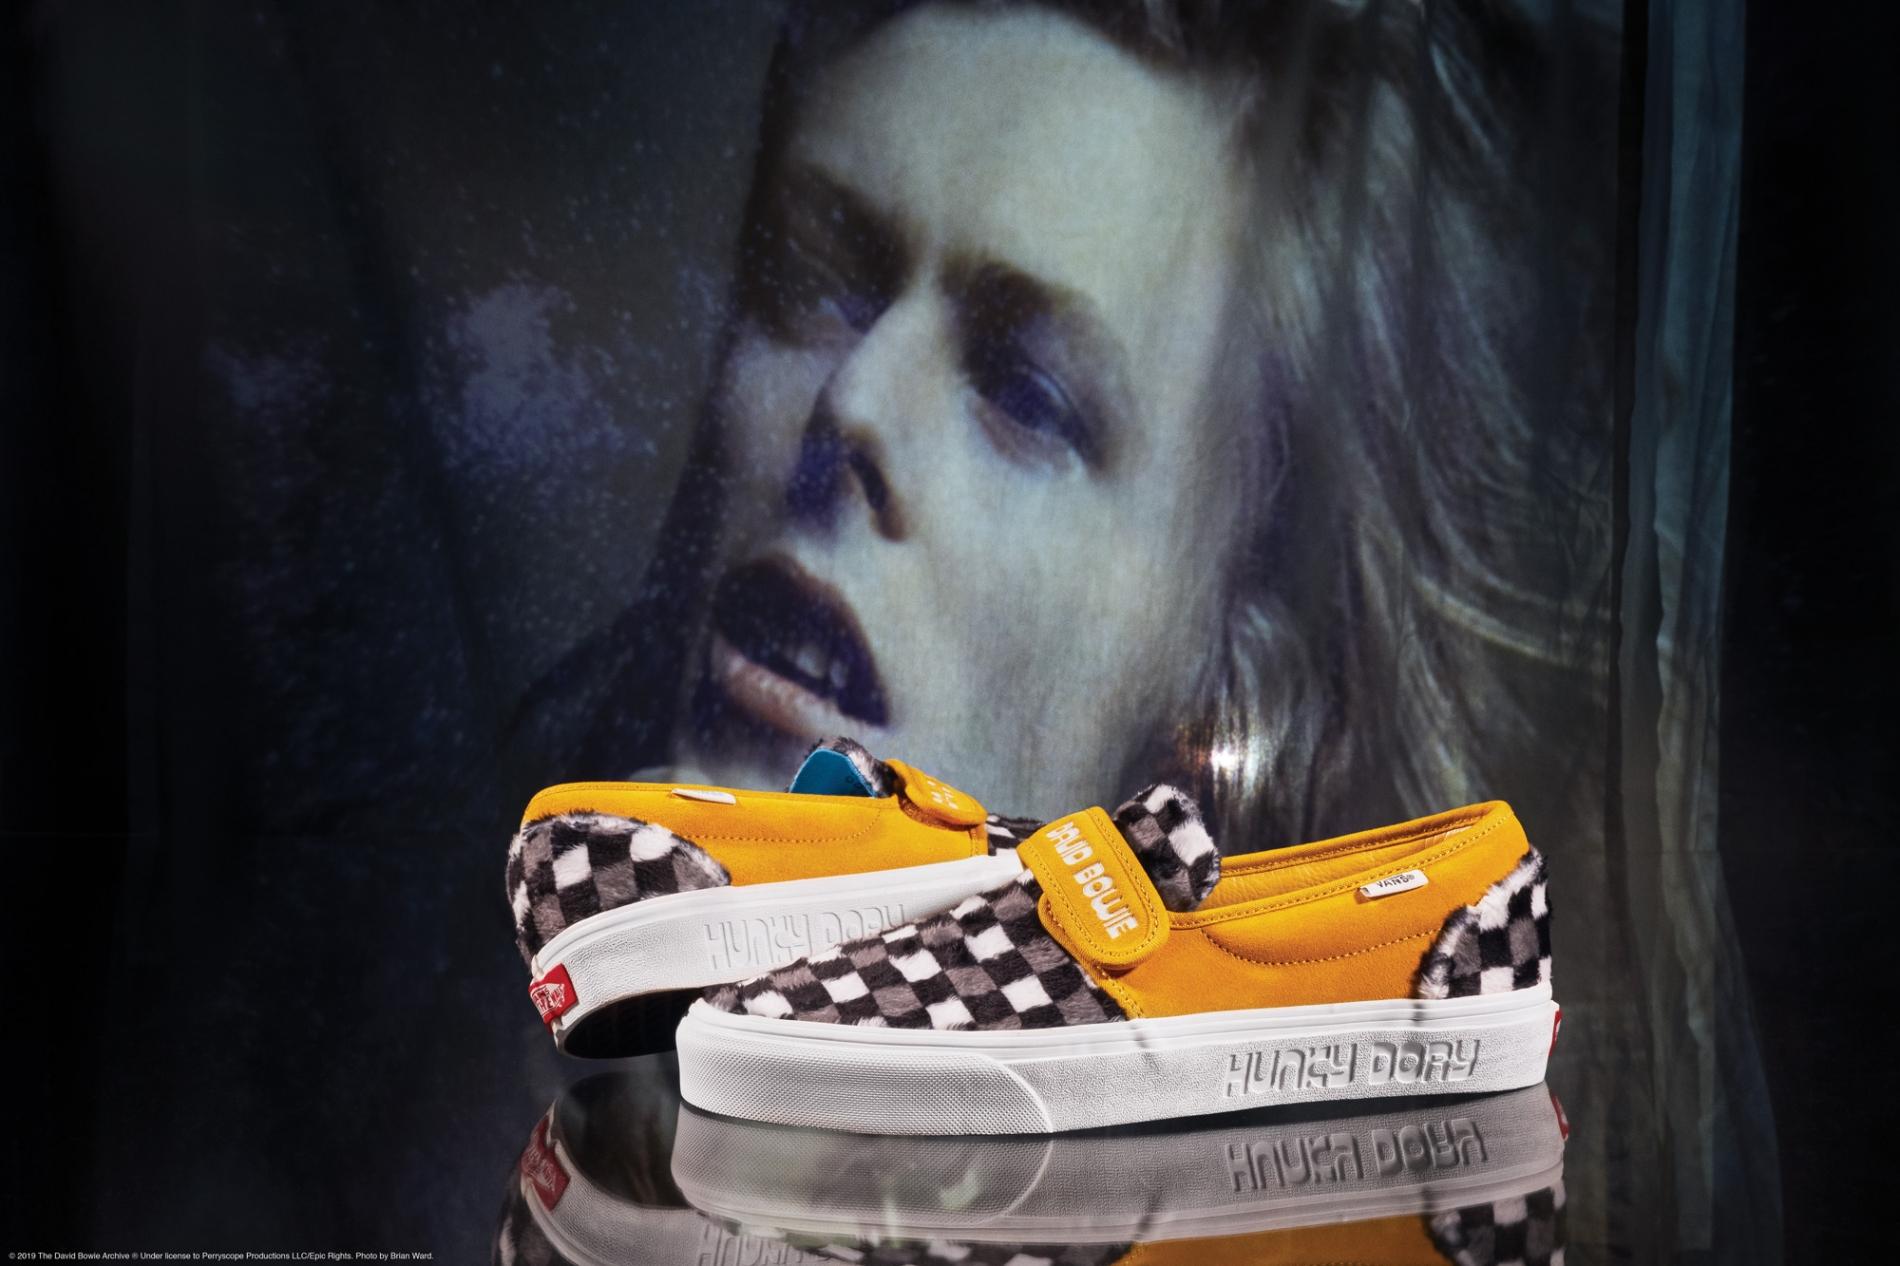 hunky dory david bowie vans